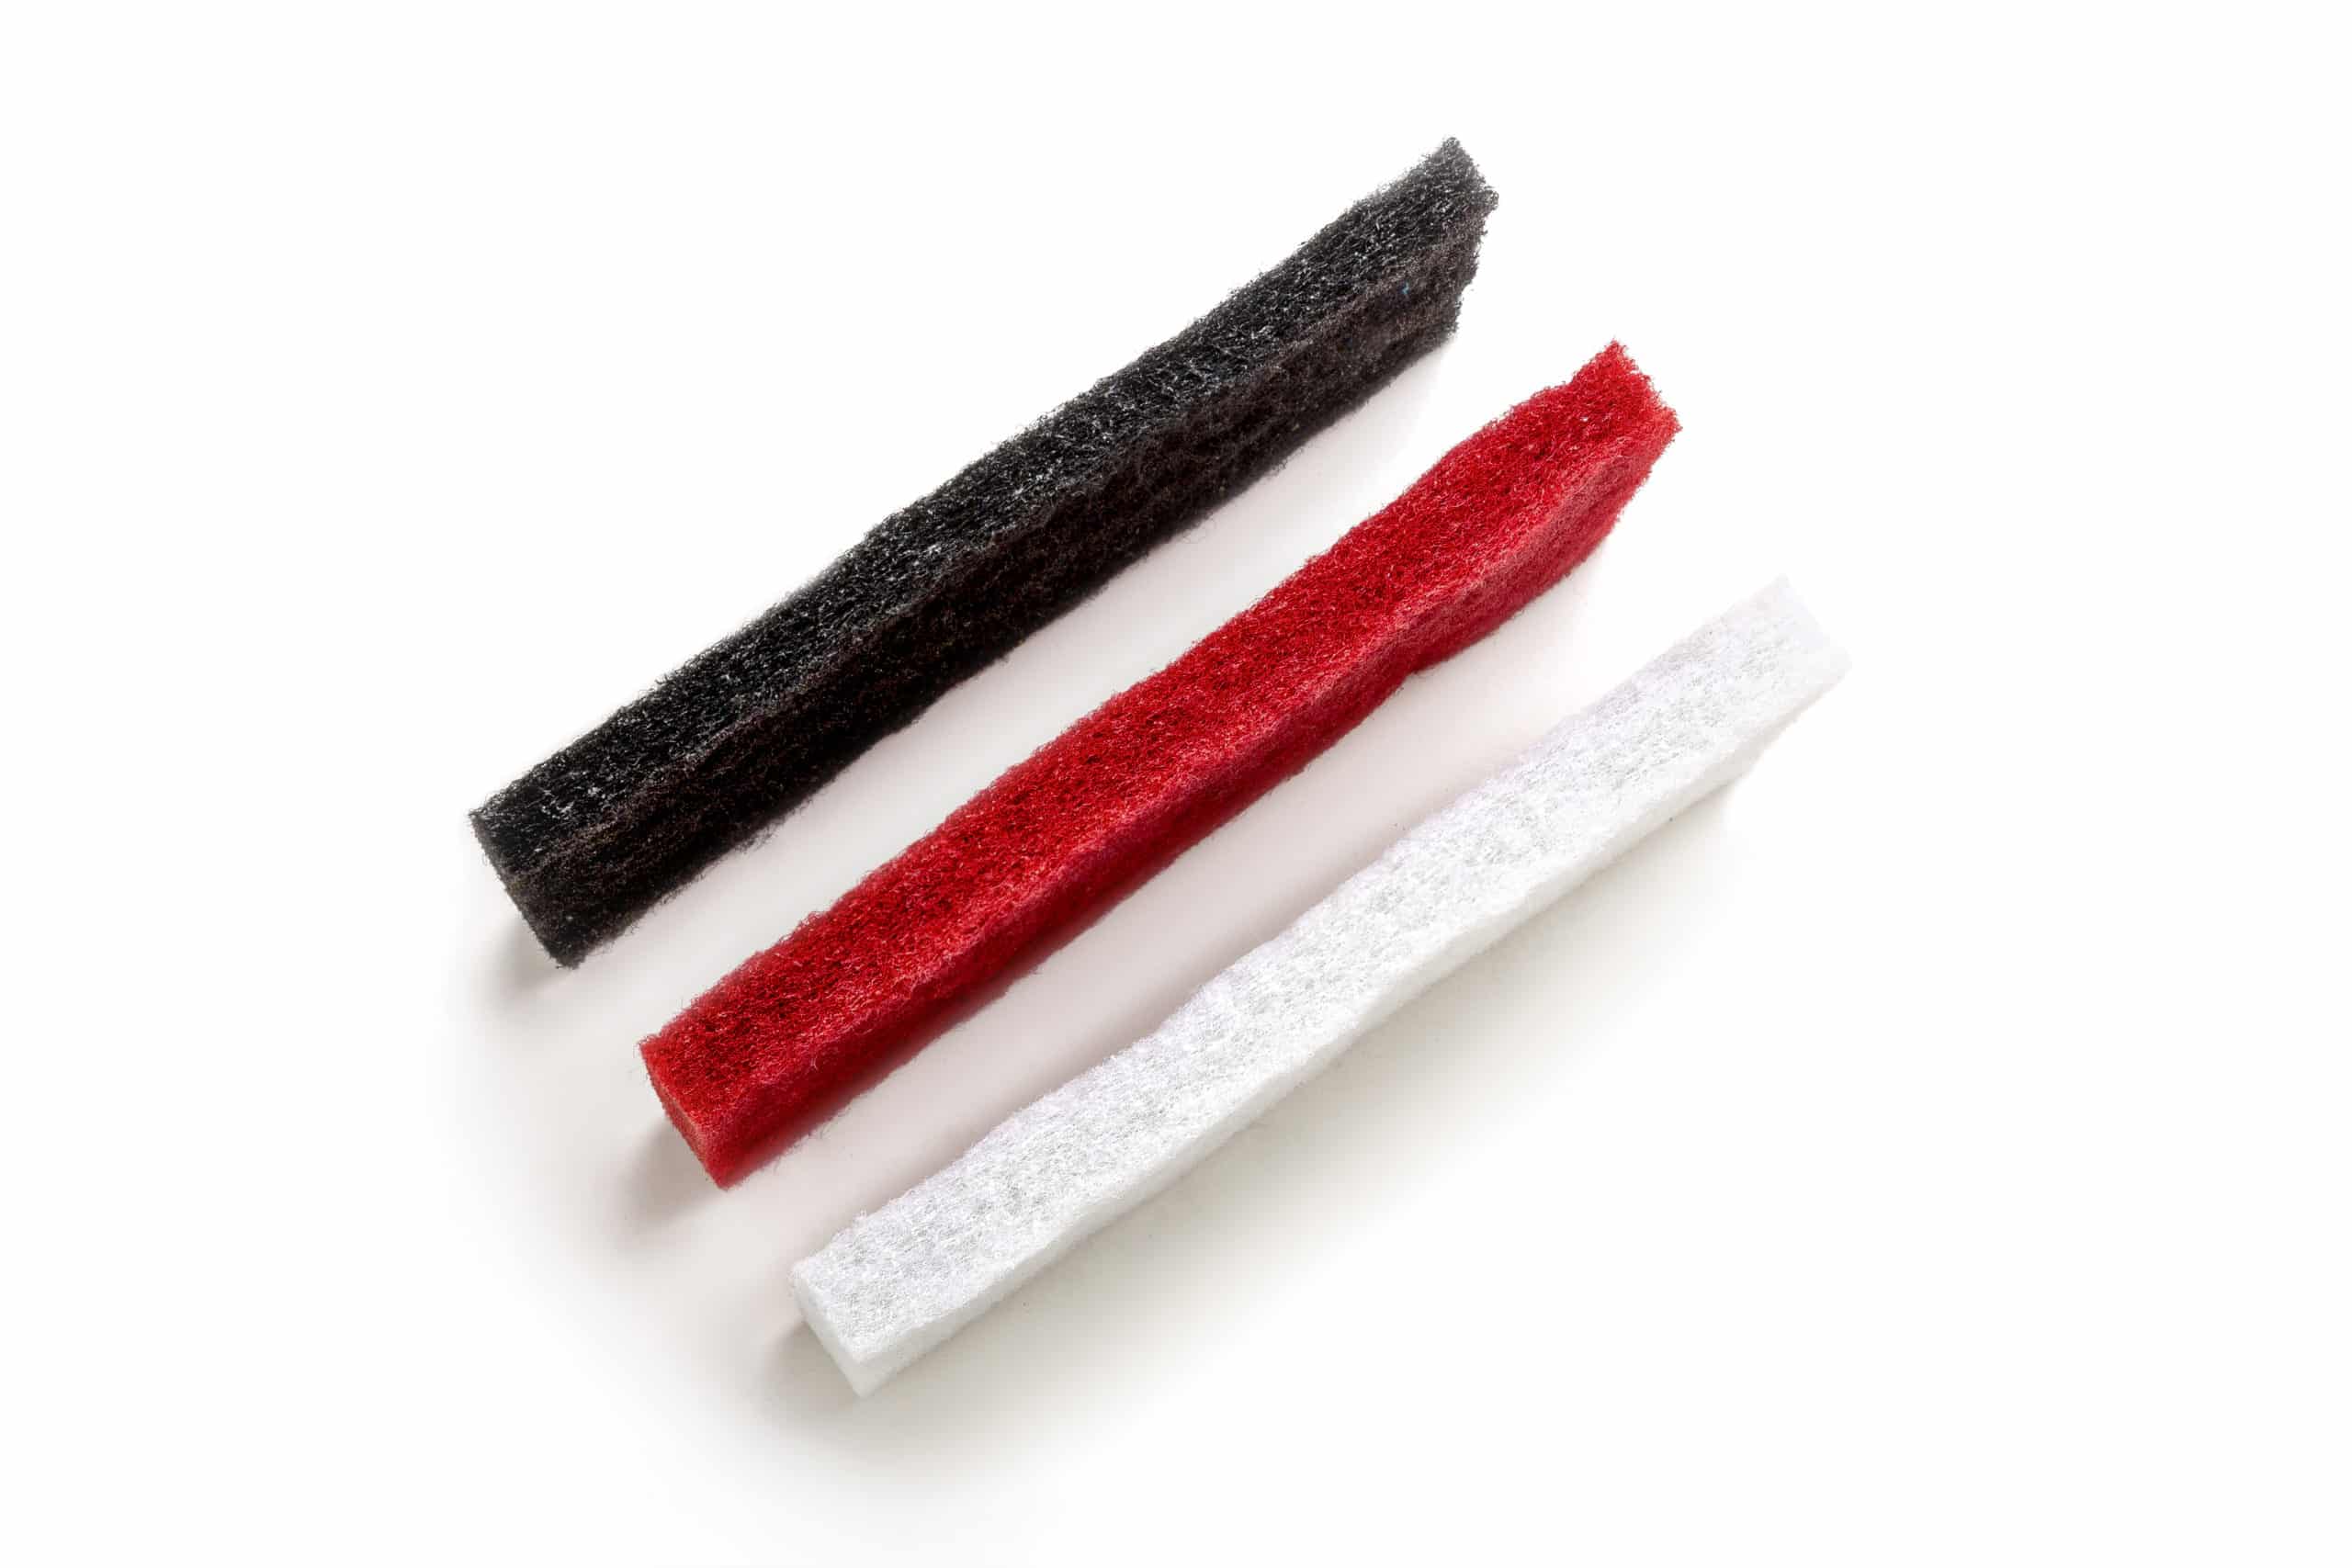 The Simple Scrub pads come in different colors - including black, red and white - and strengths.